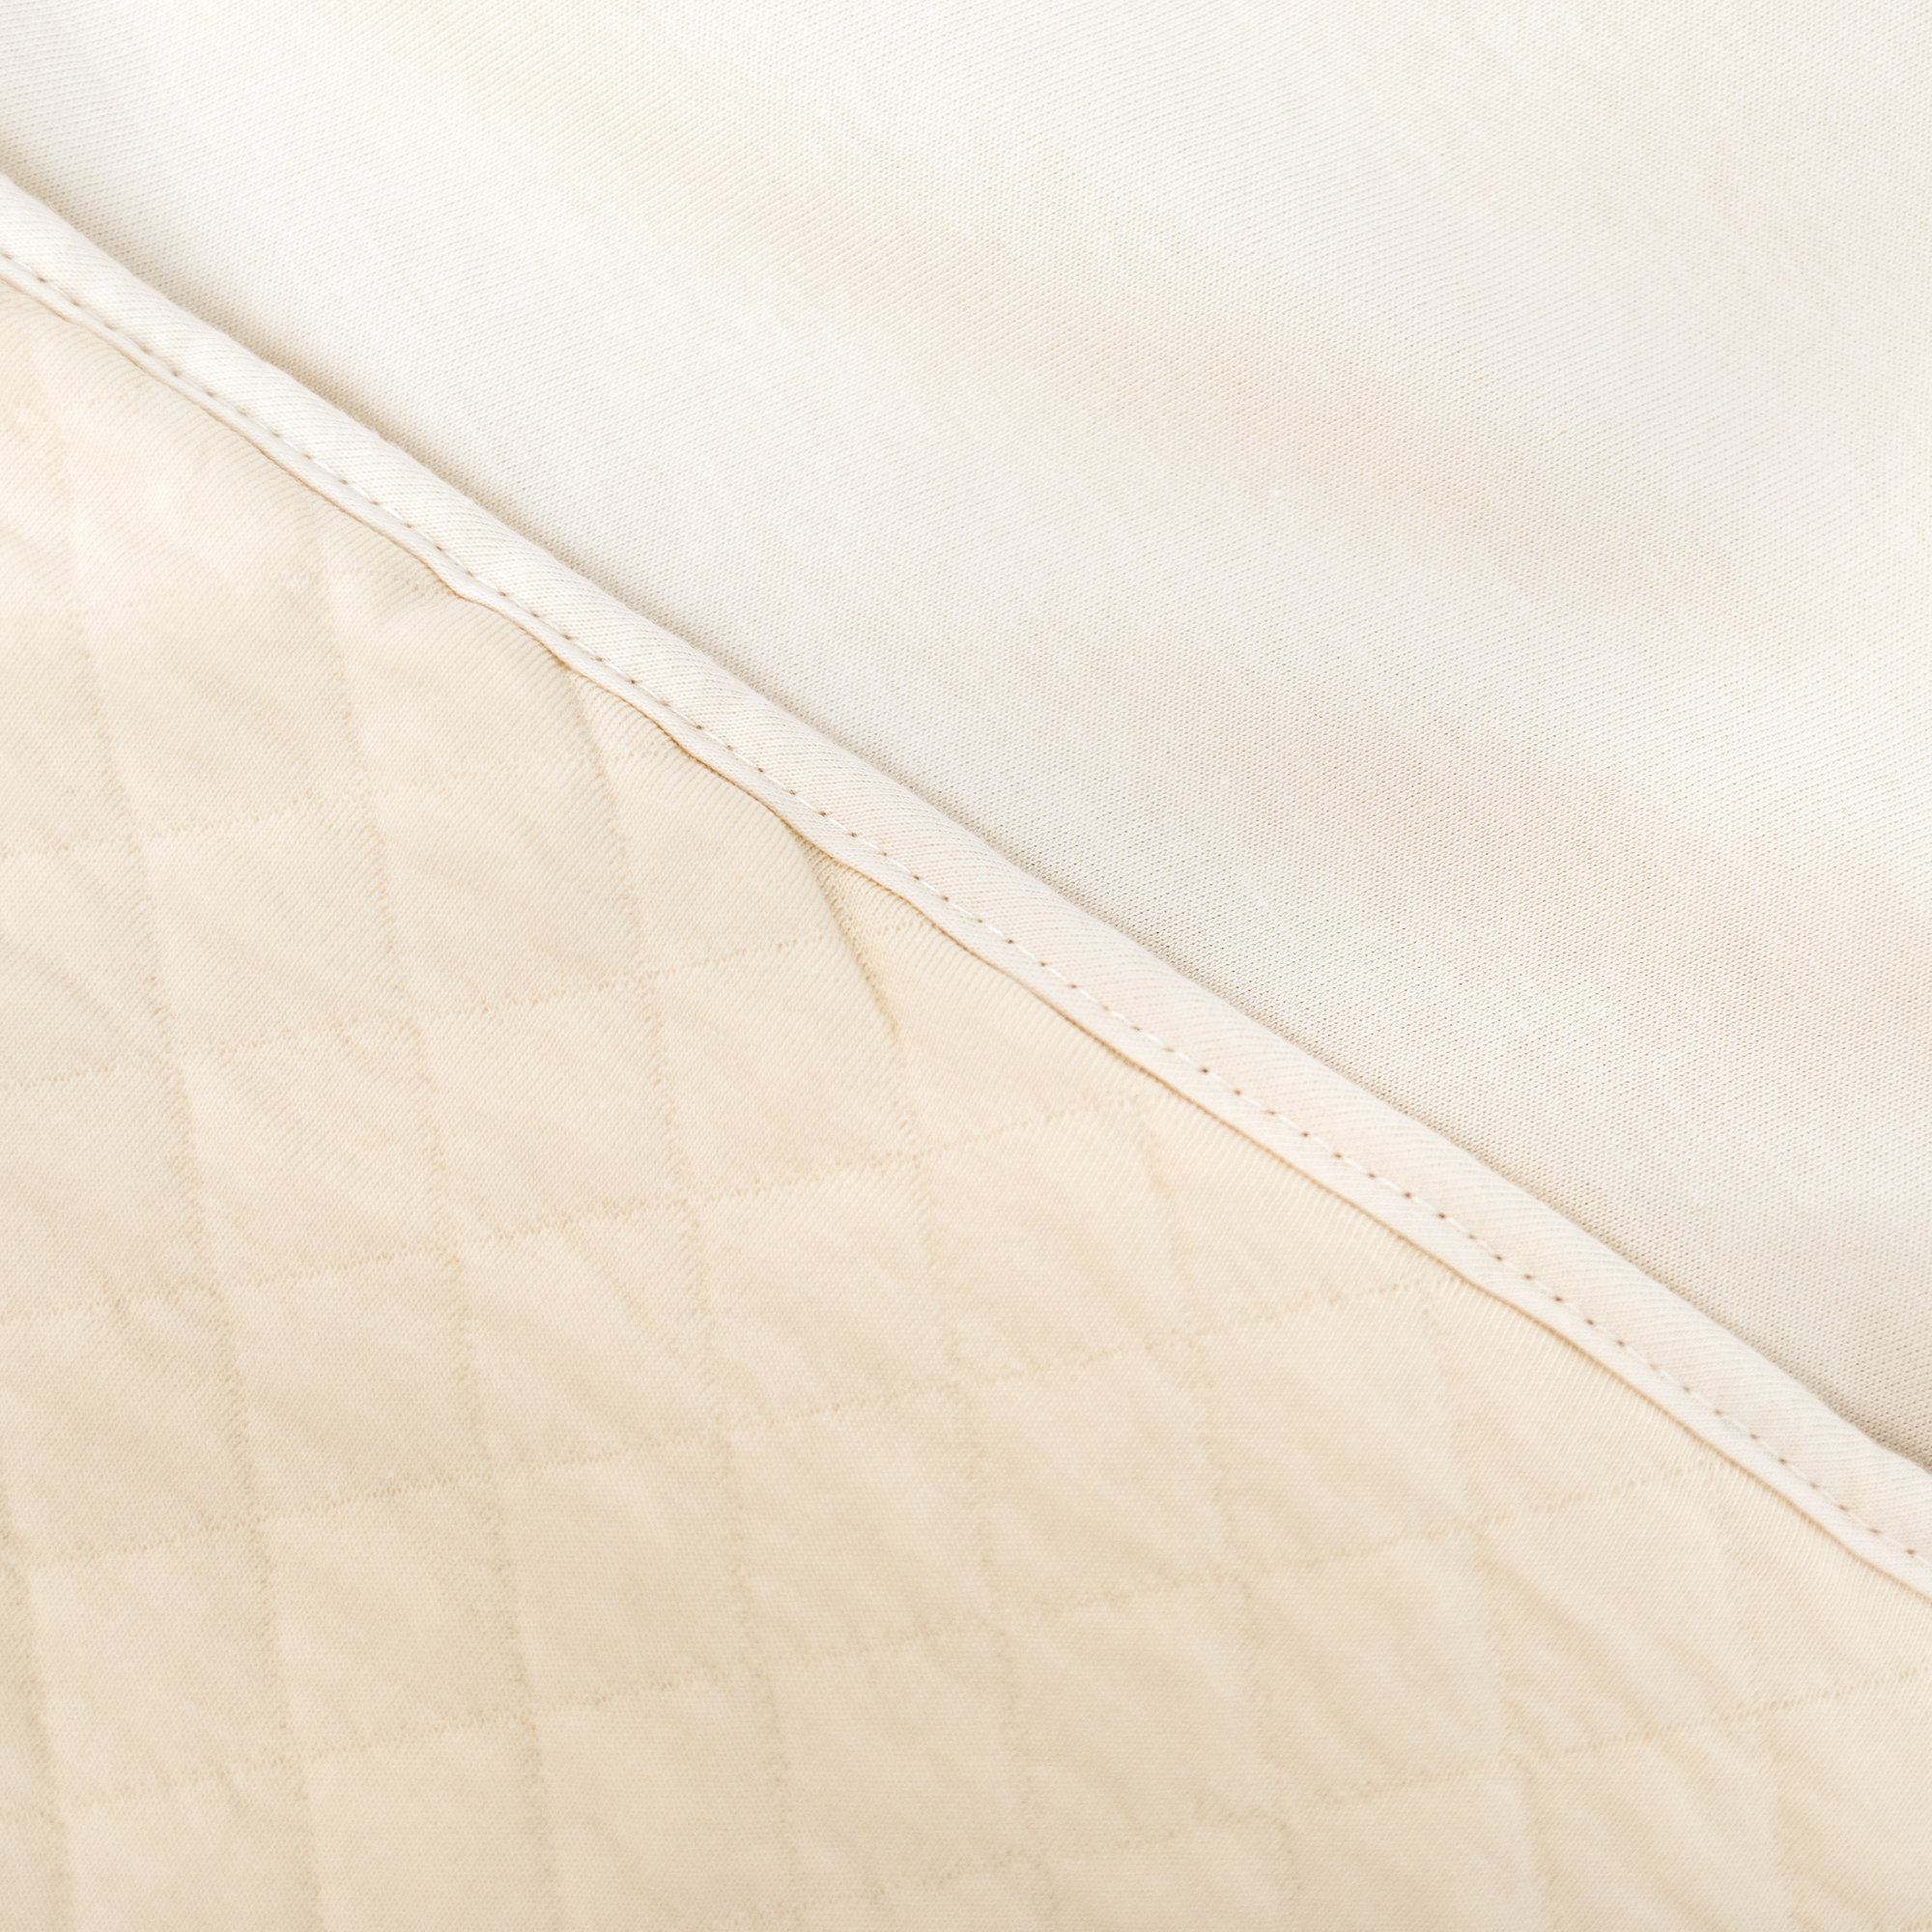 Manta Pady quilted + jersey 75x100cm QUILT Cream tog 3[WANDER]